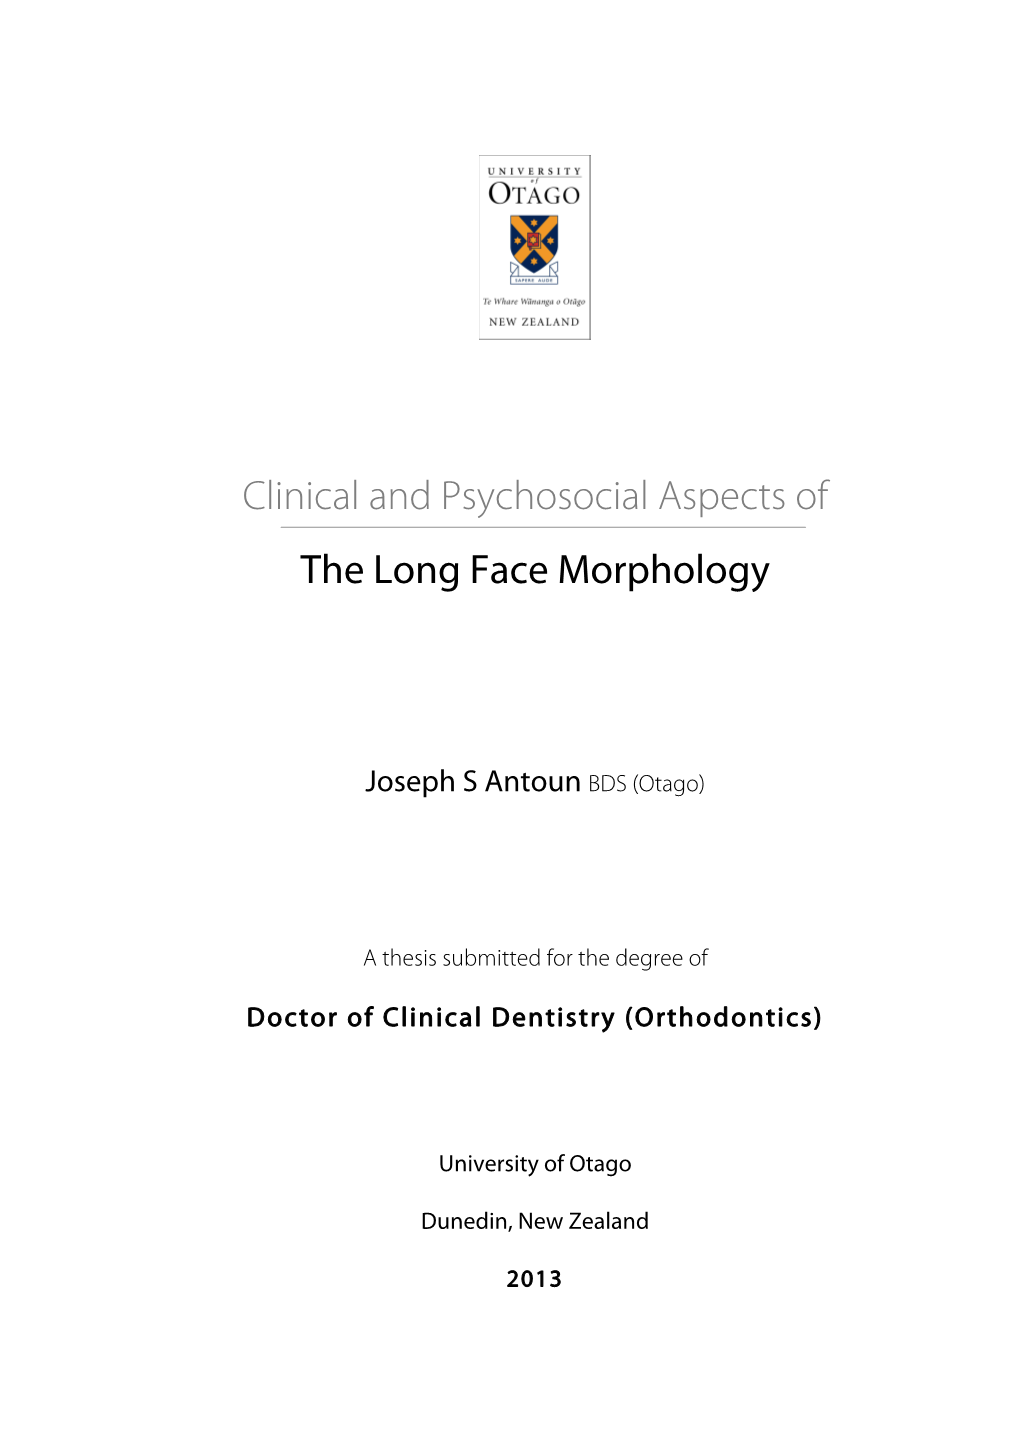 Clinical and Psychosocial Aspects of the Long Face Morphology